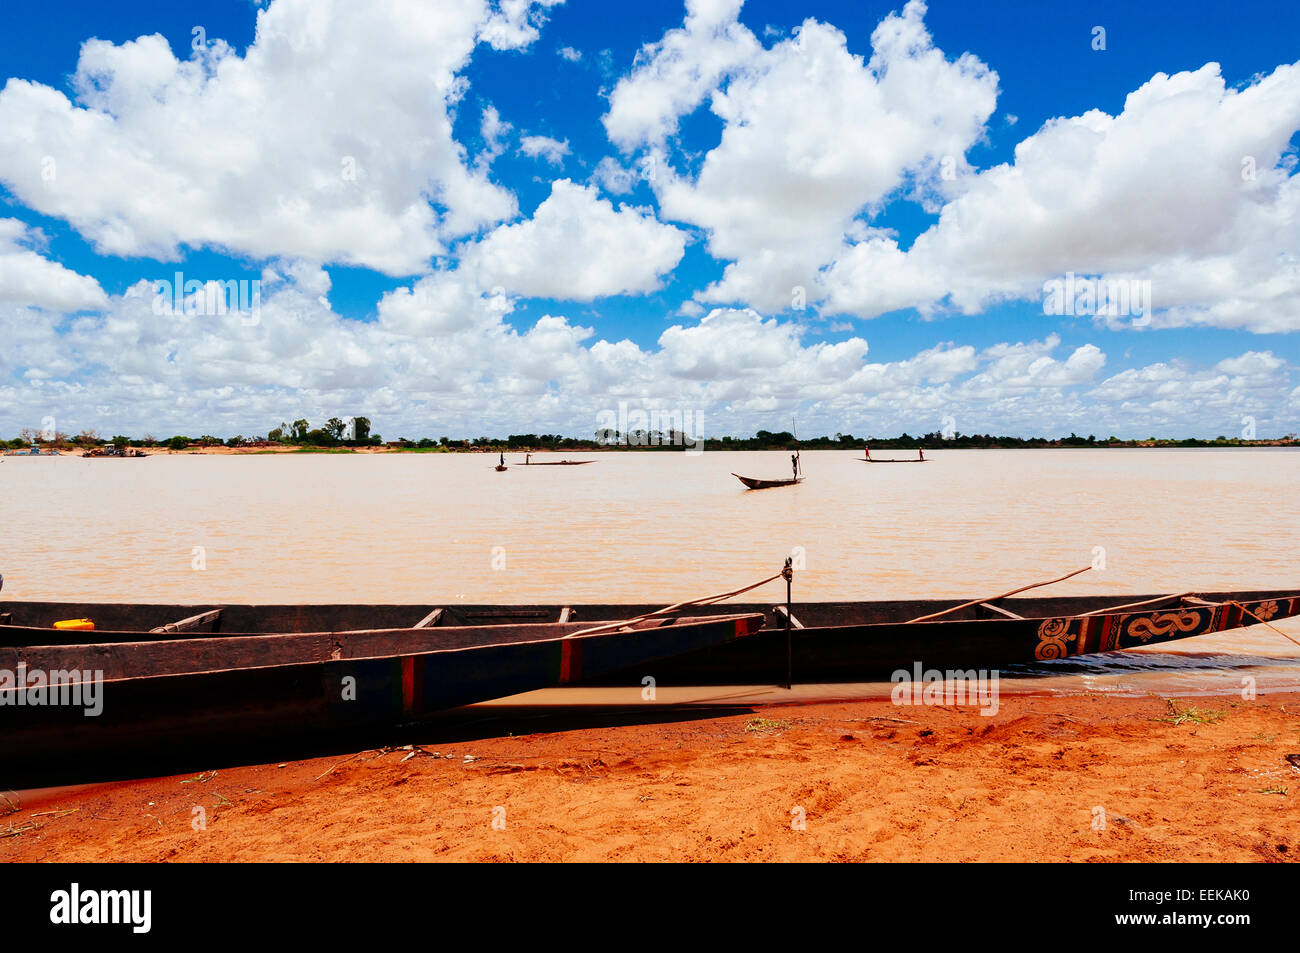 Canoes at the riverbank and men fishing from canoes on the Bani river. Djenne, Mali Stock Photo